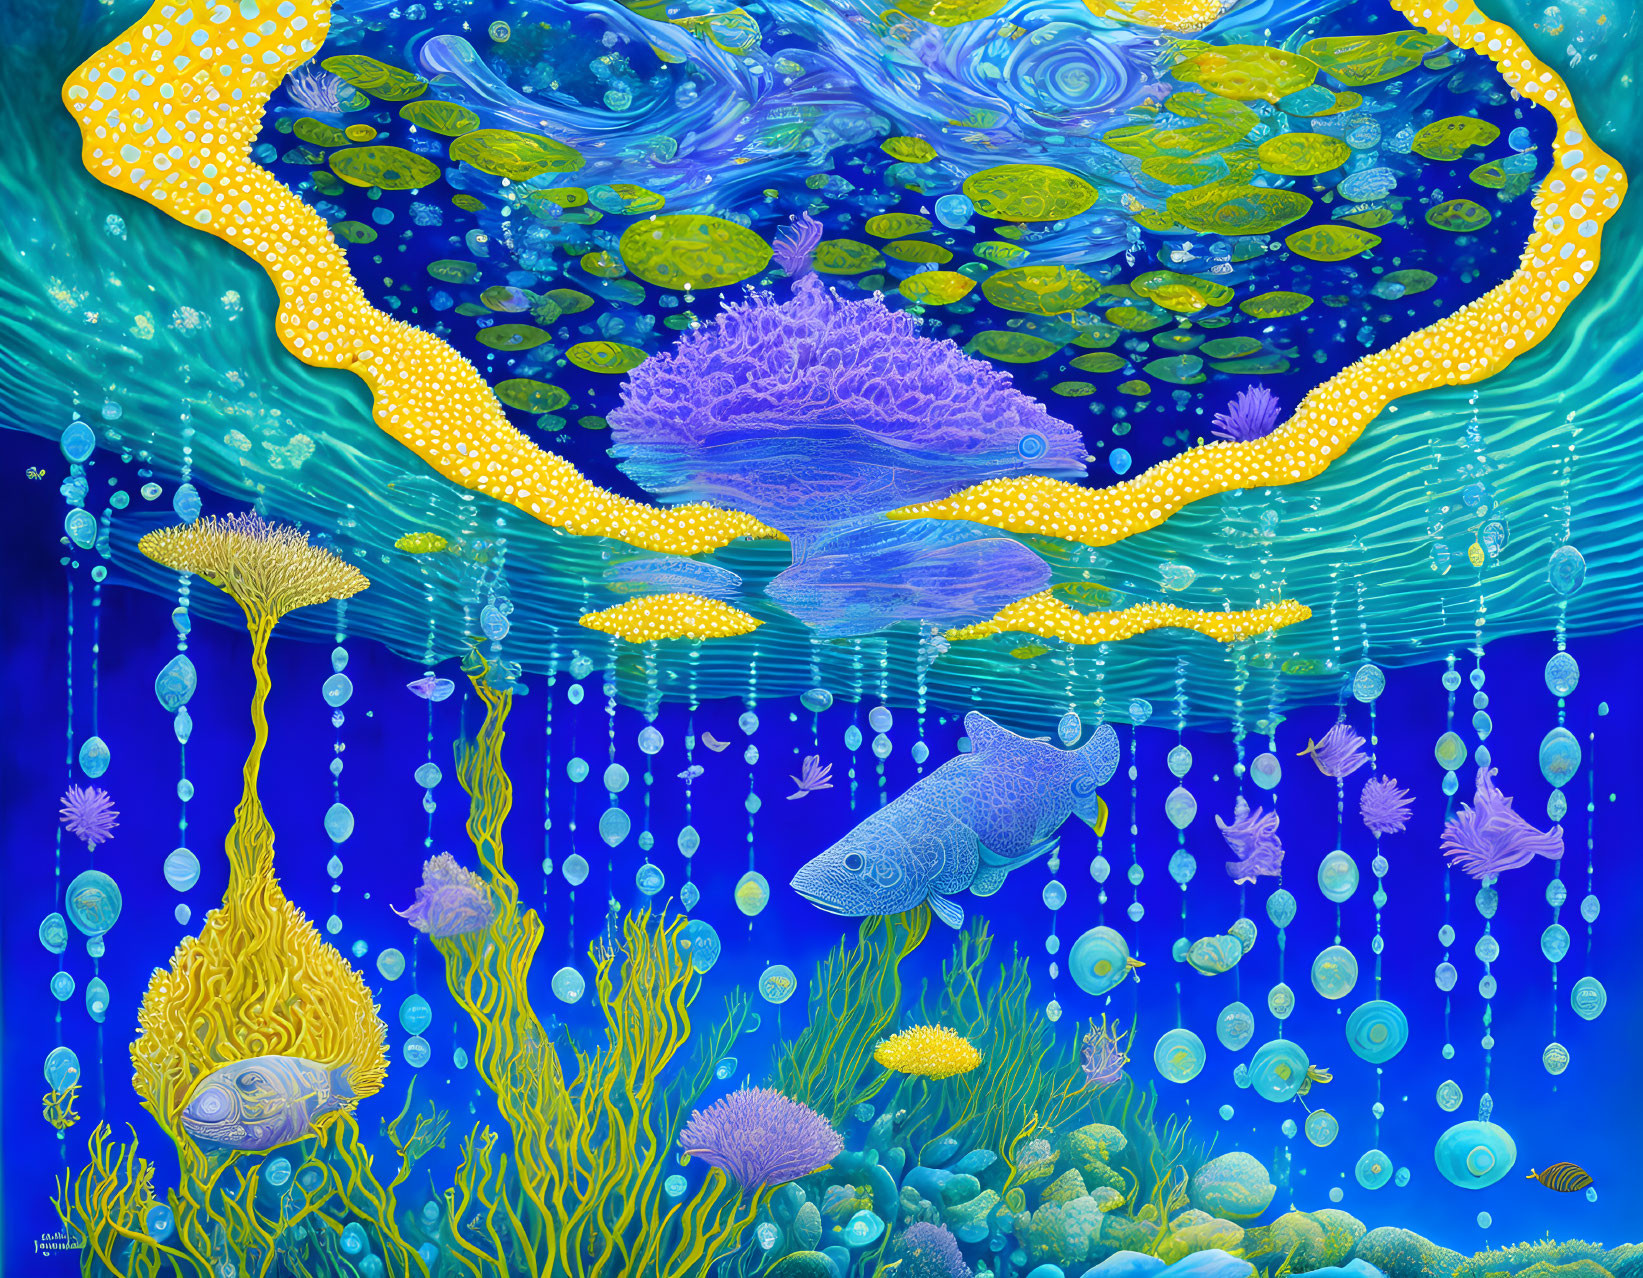 Colorful Underwater Marine Life Illustration in Blue and Yellow